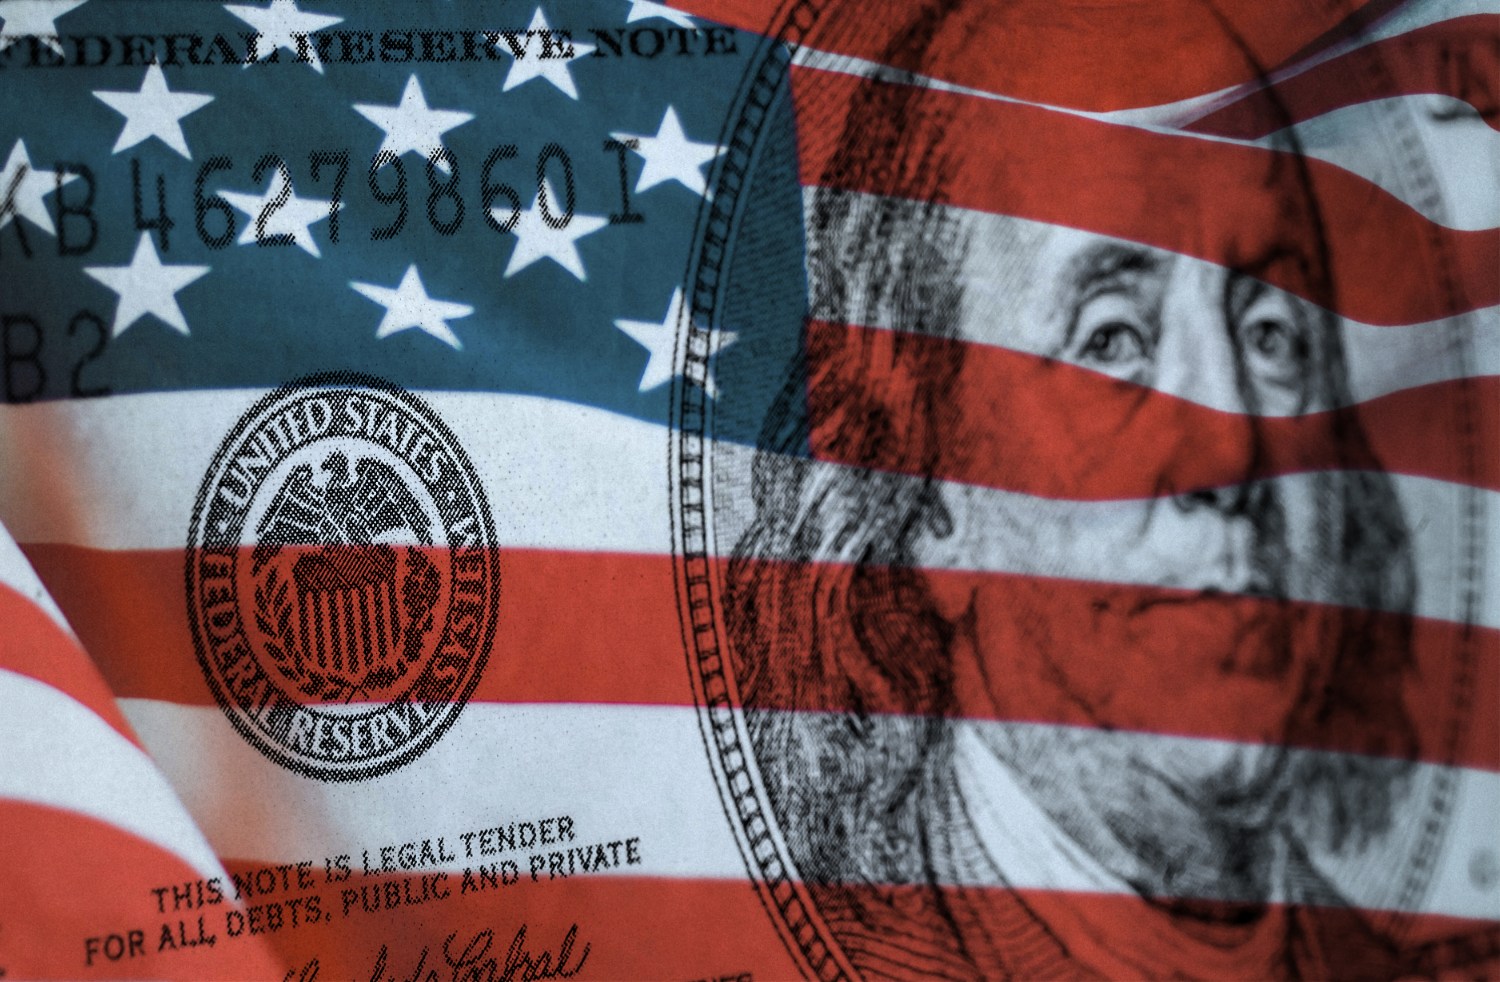 Federal reserve system symbol on hundred dollar bill with united states of america flag